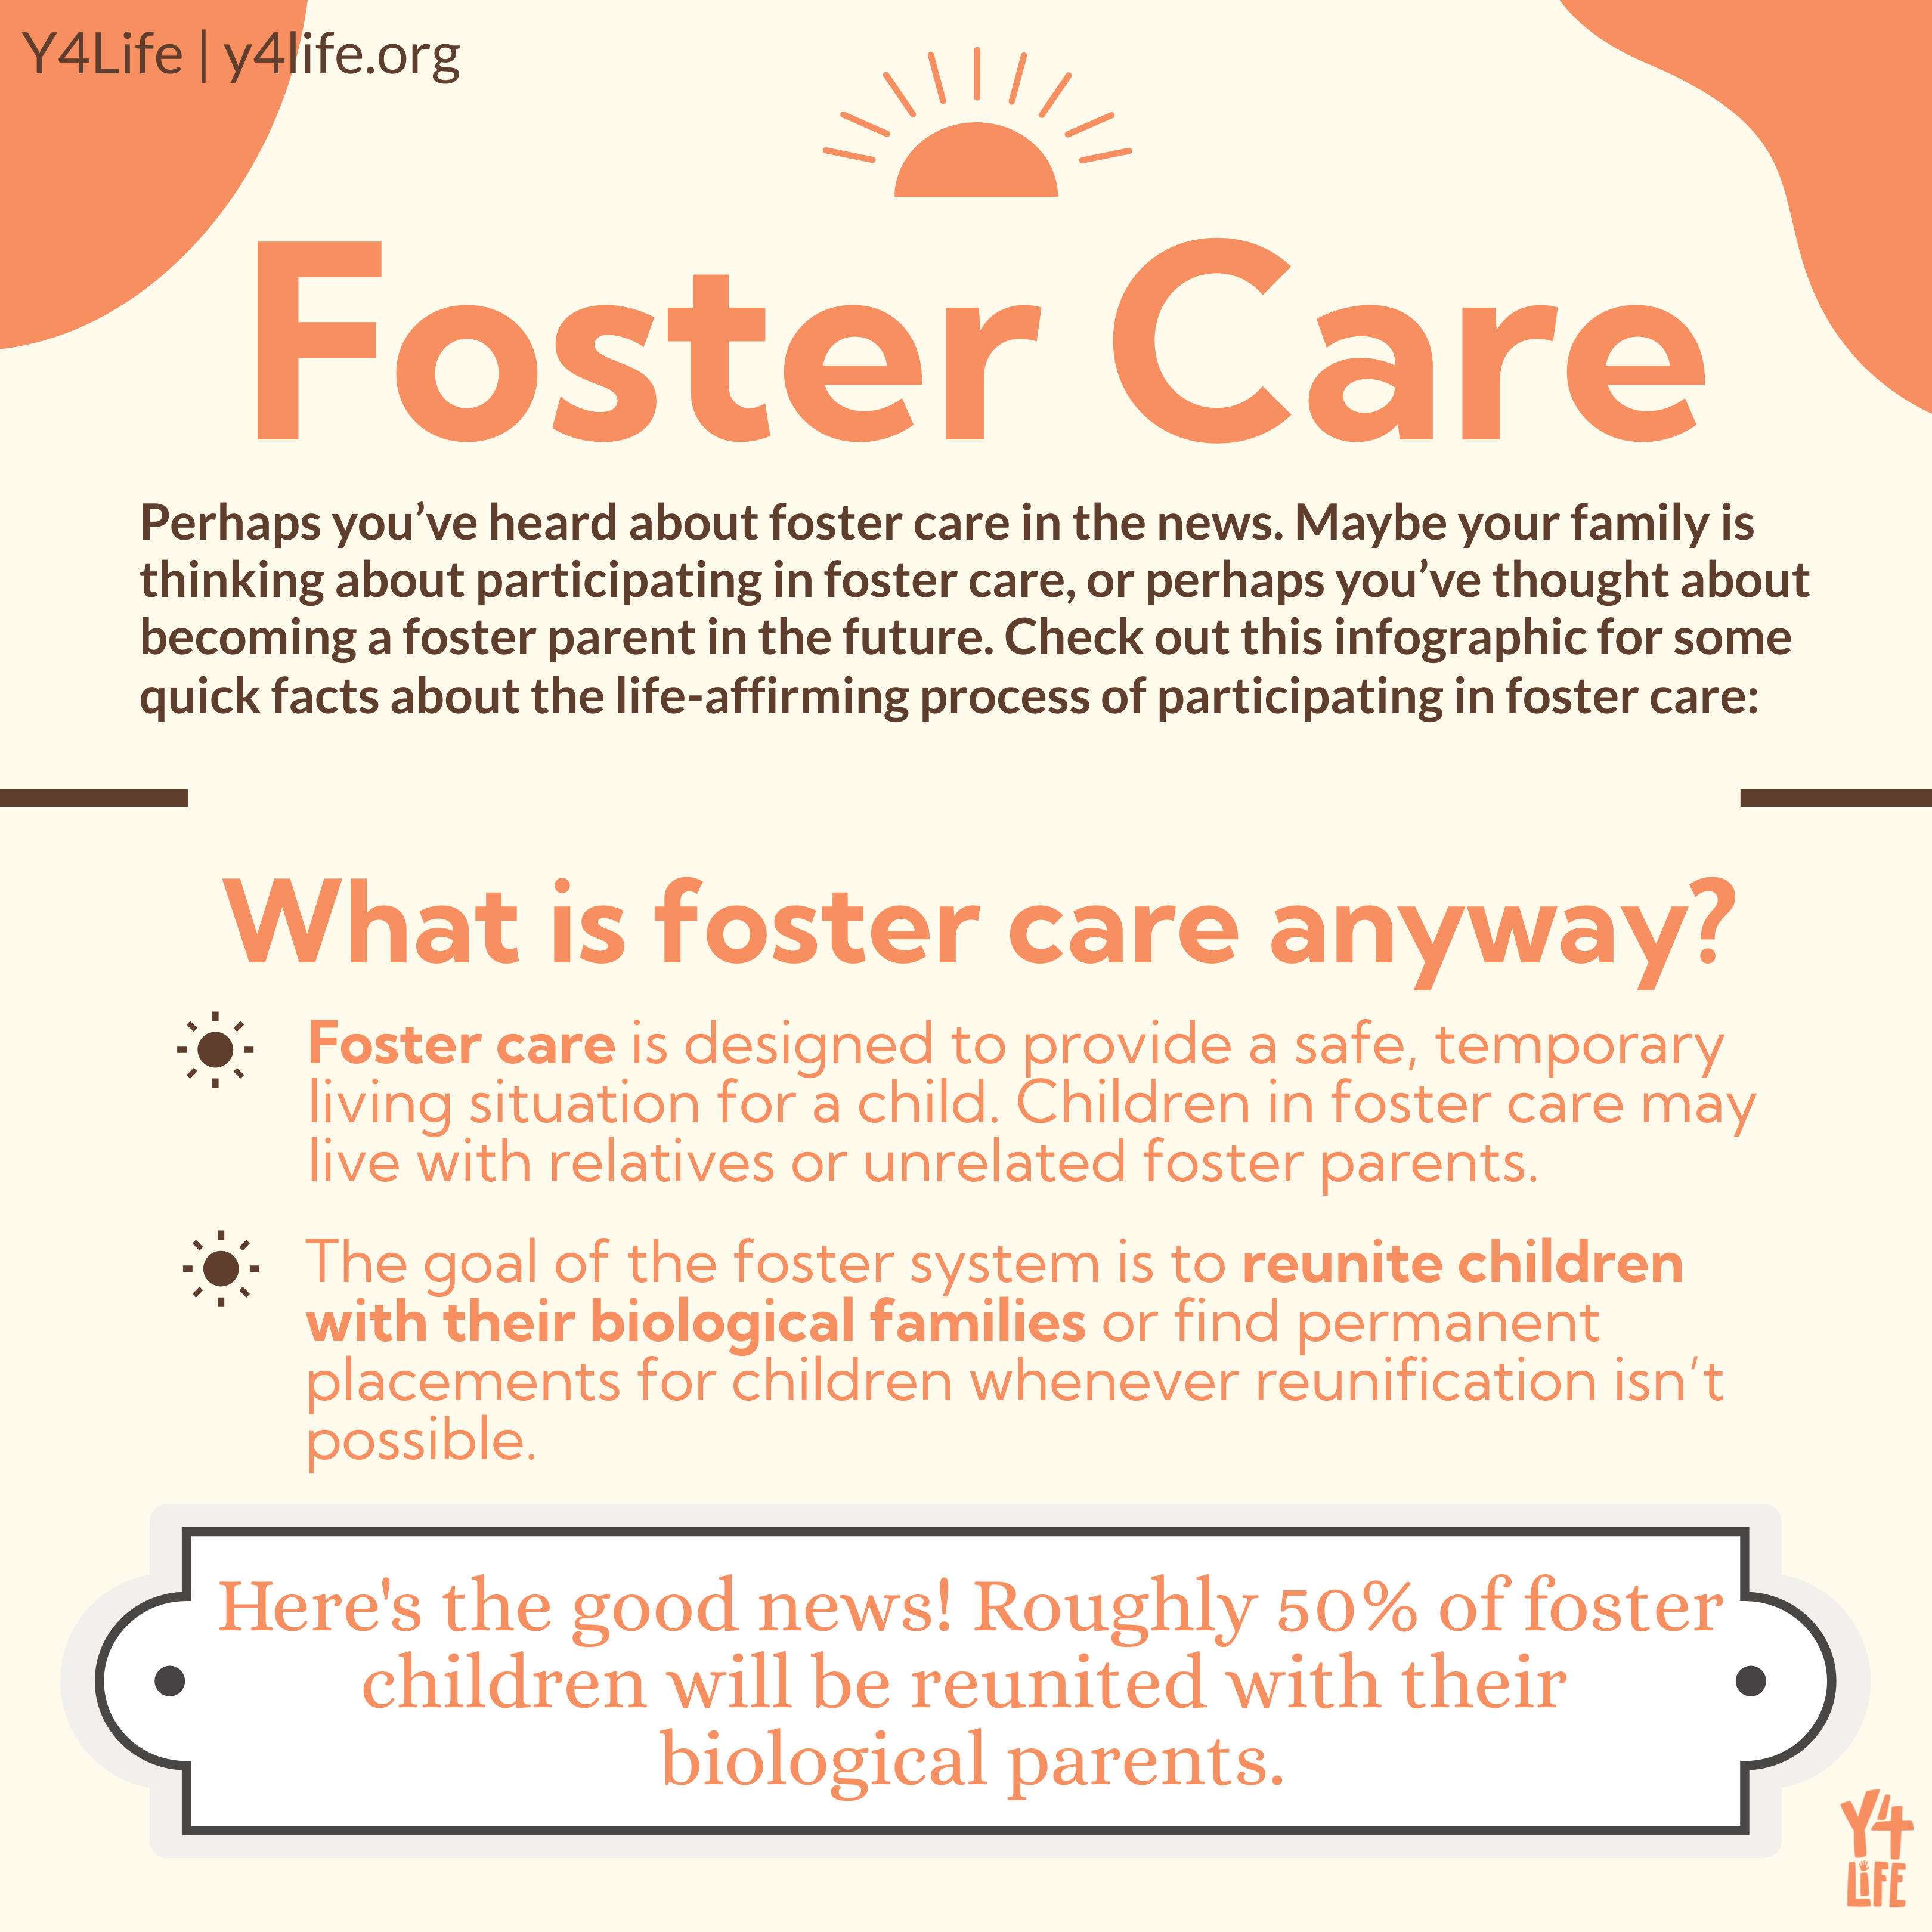 Foster Care (fold-out brochure)